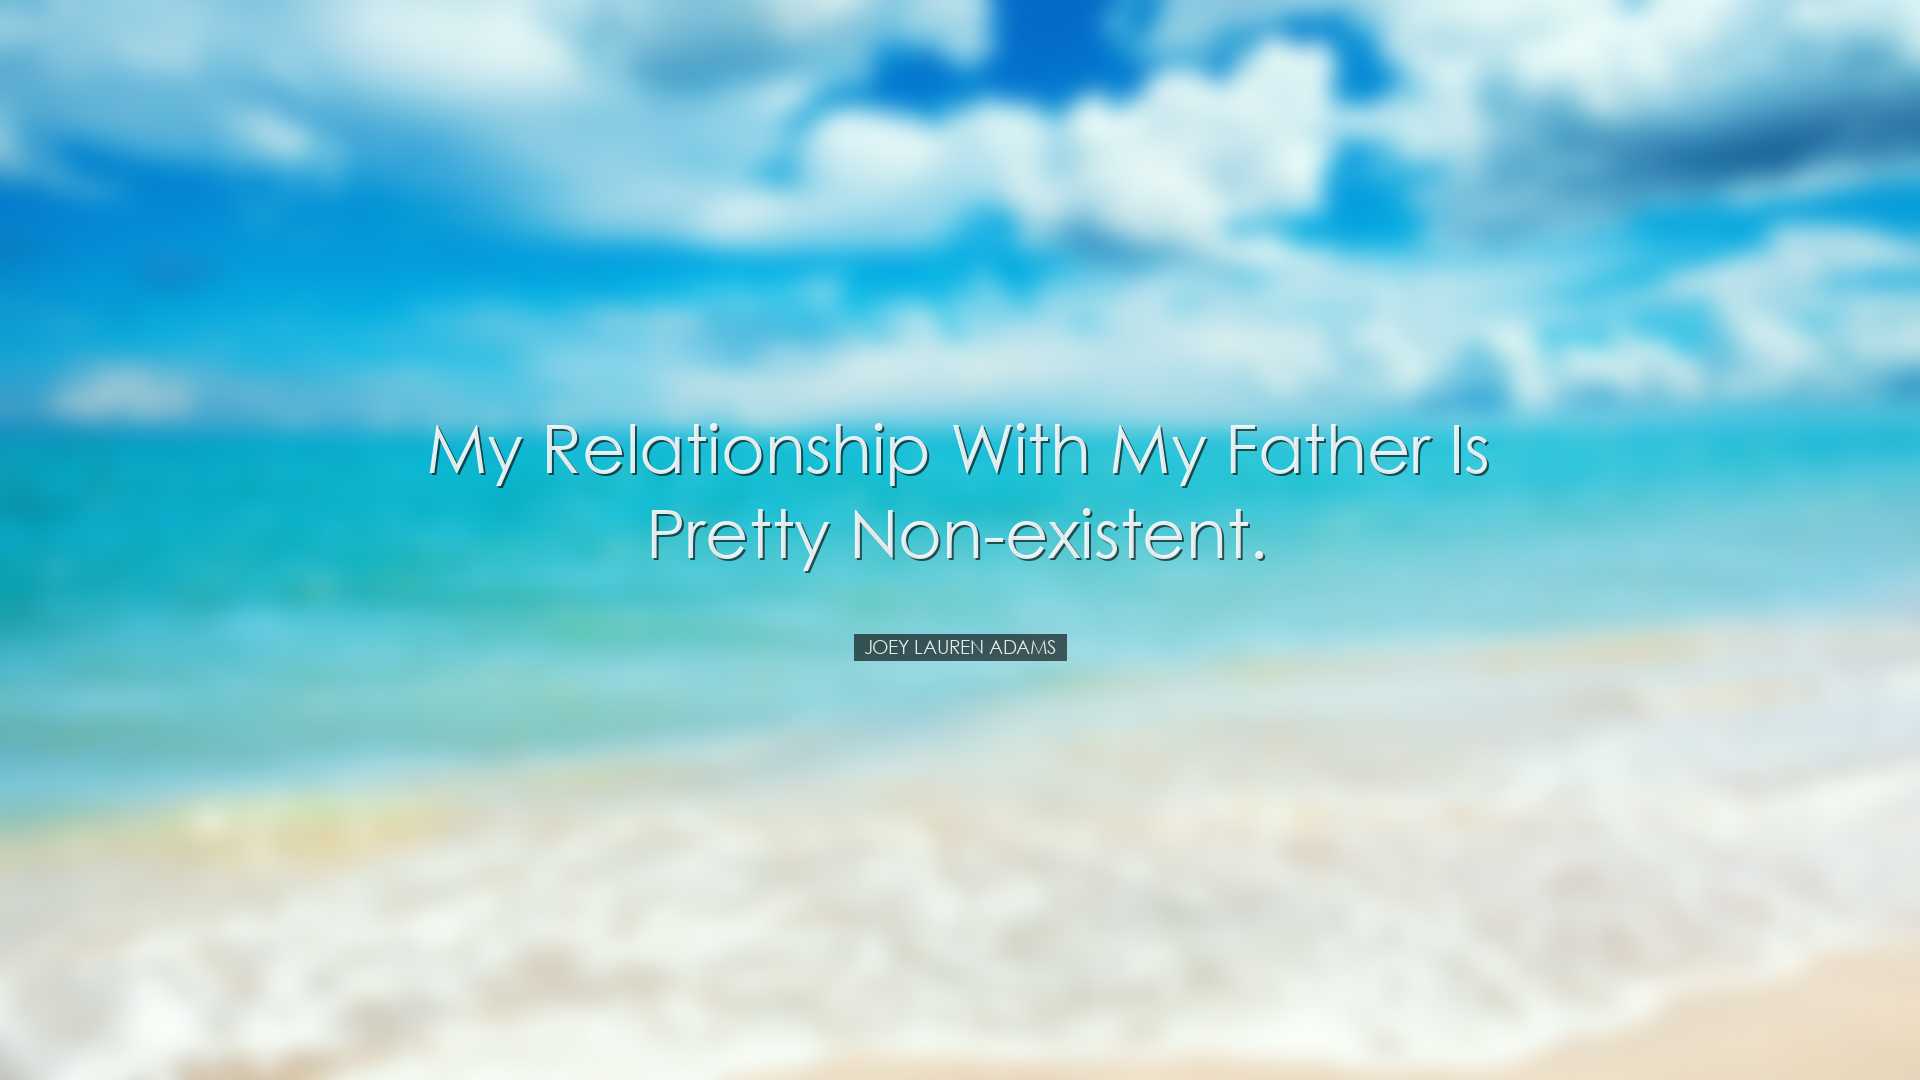 My relationship with my father is pretty non-existent. - Joey Laur